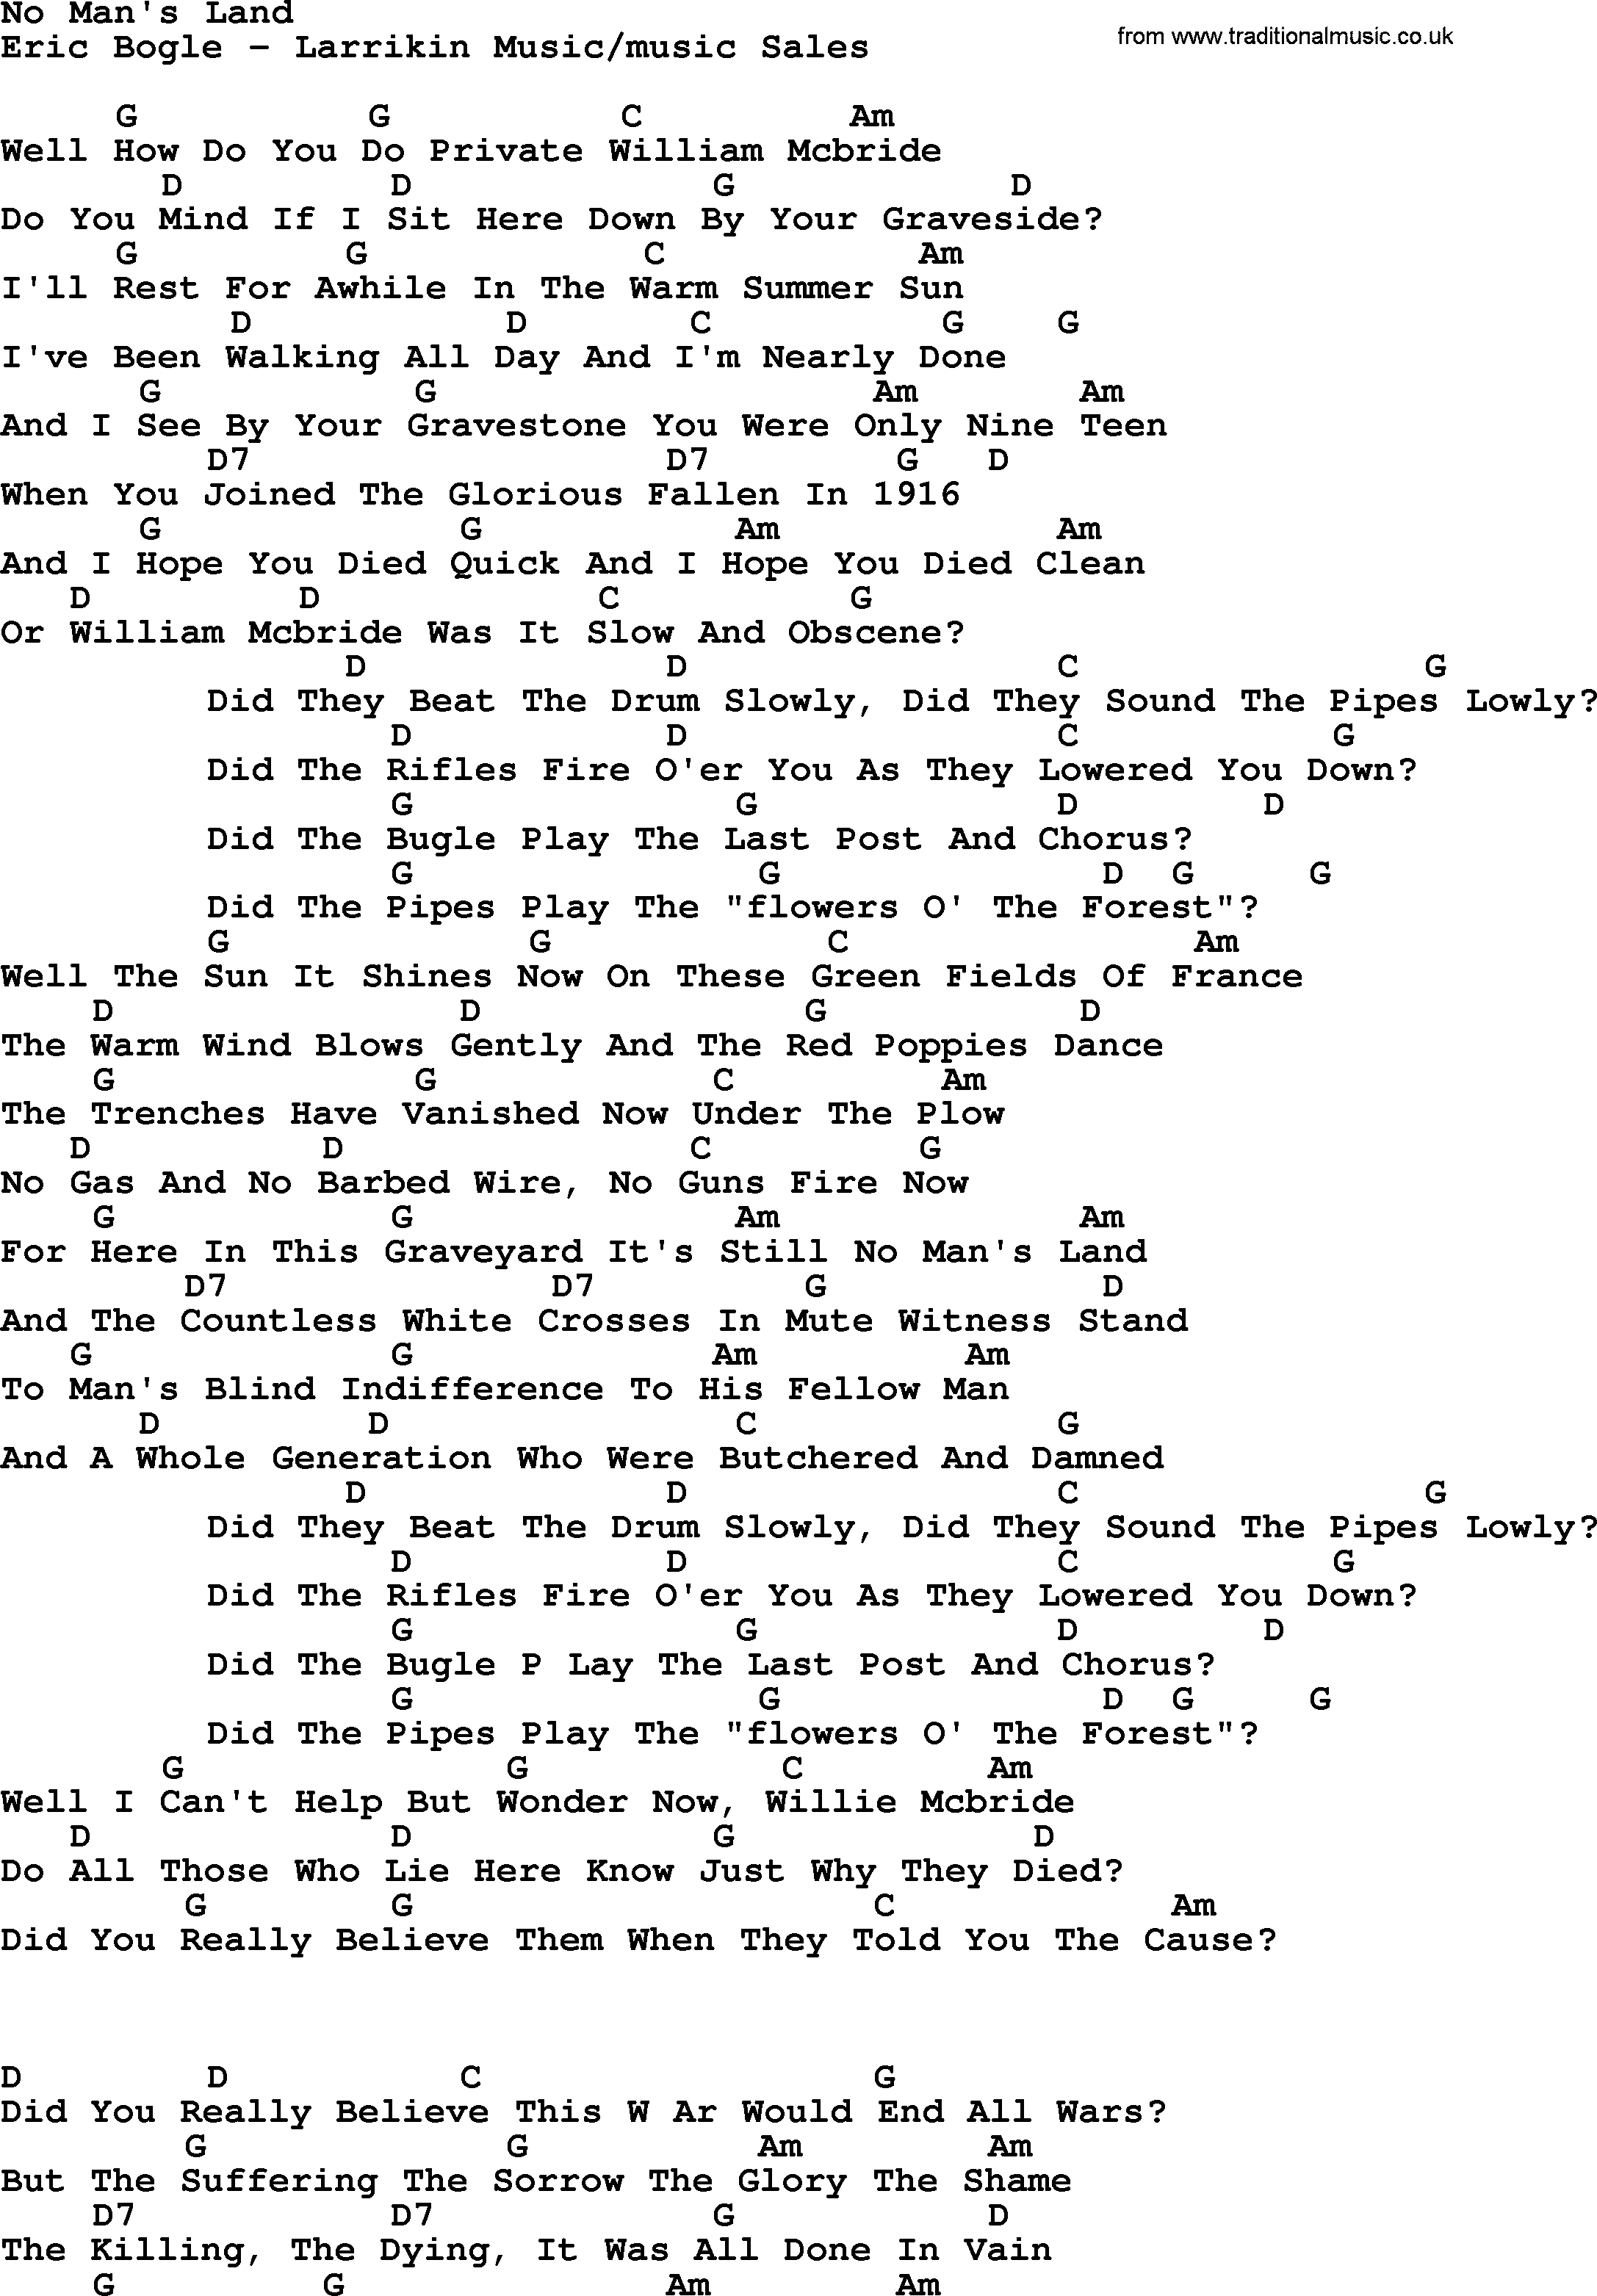 Peter, Paul and Mary song No Mans Land, lyrics and chords